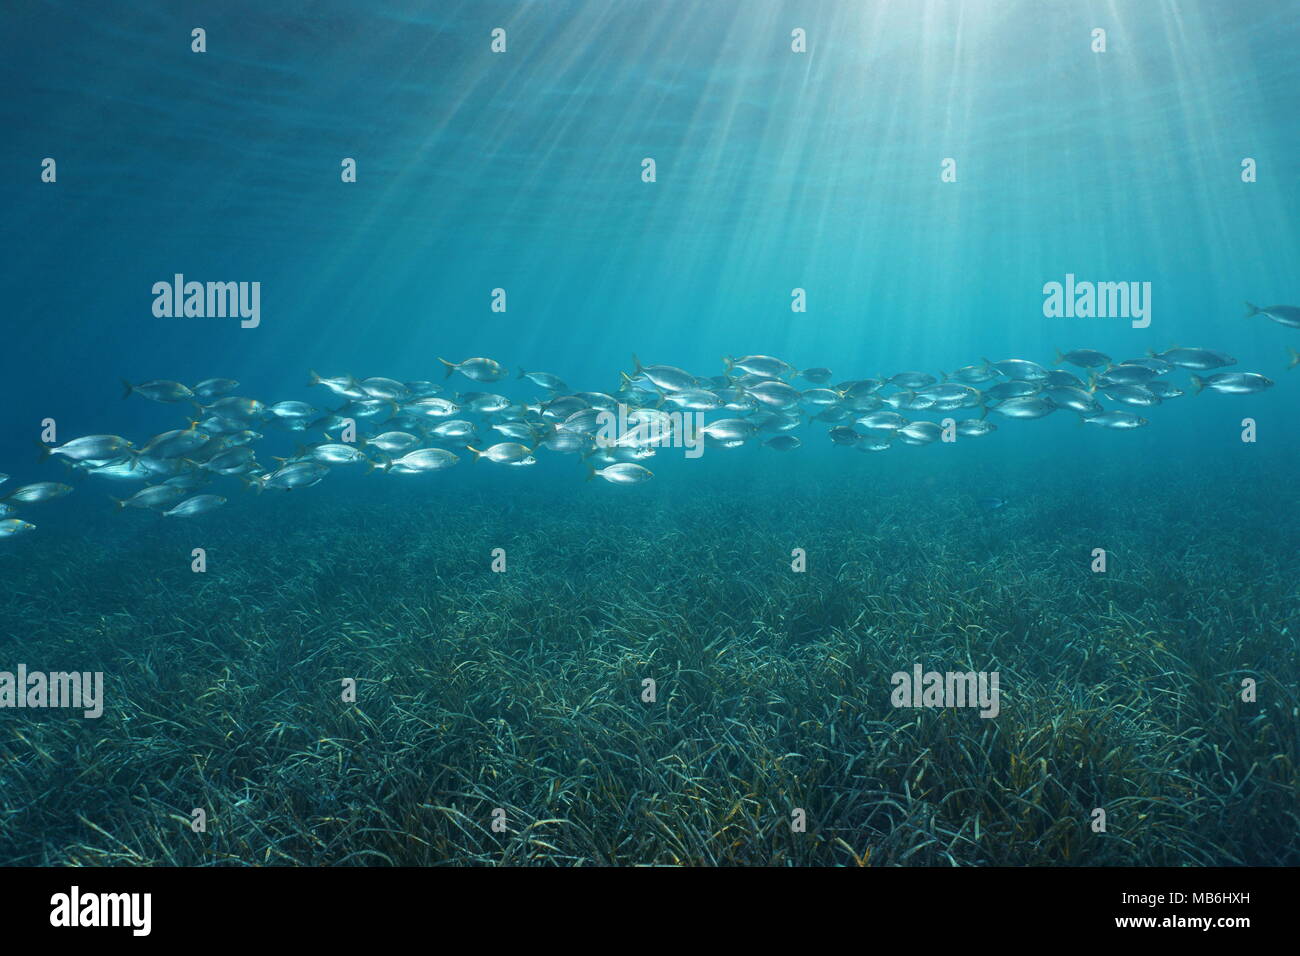 A school of fish (Sarpa salpa) over a grassy seabed with natural sunlight underwater in the Mediterranean sea, Cote d'Azur, French riviera, France Stock Photo